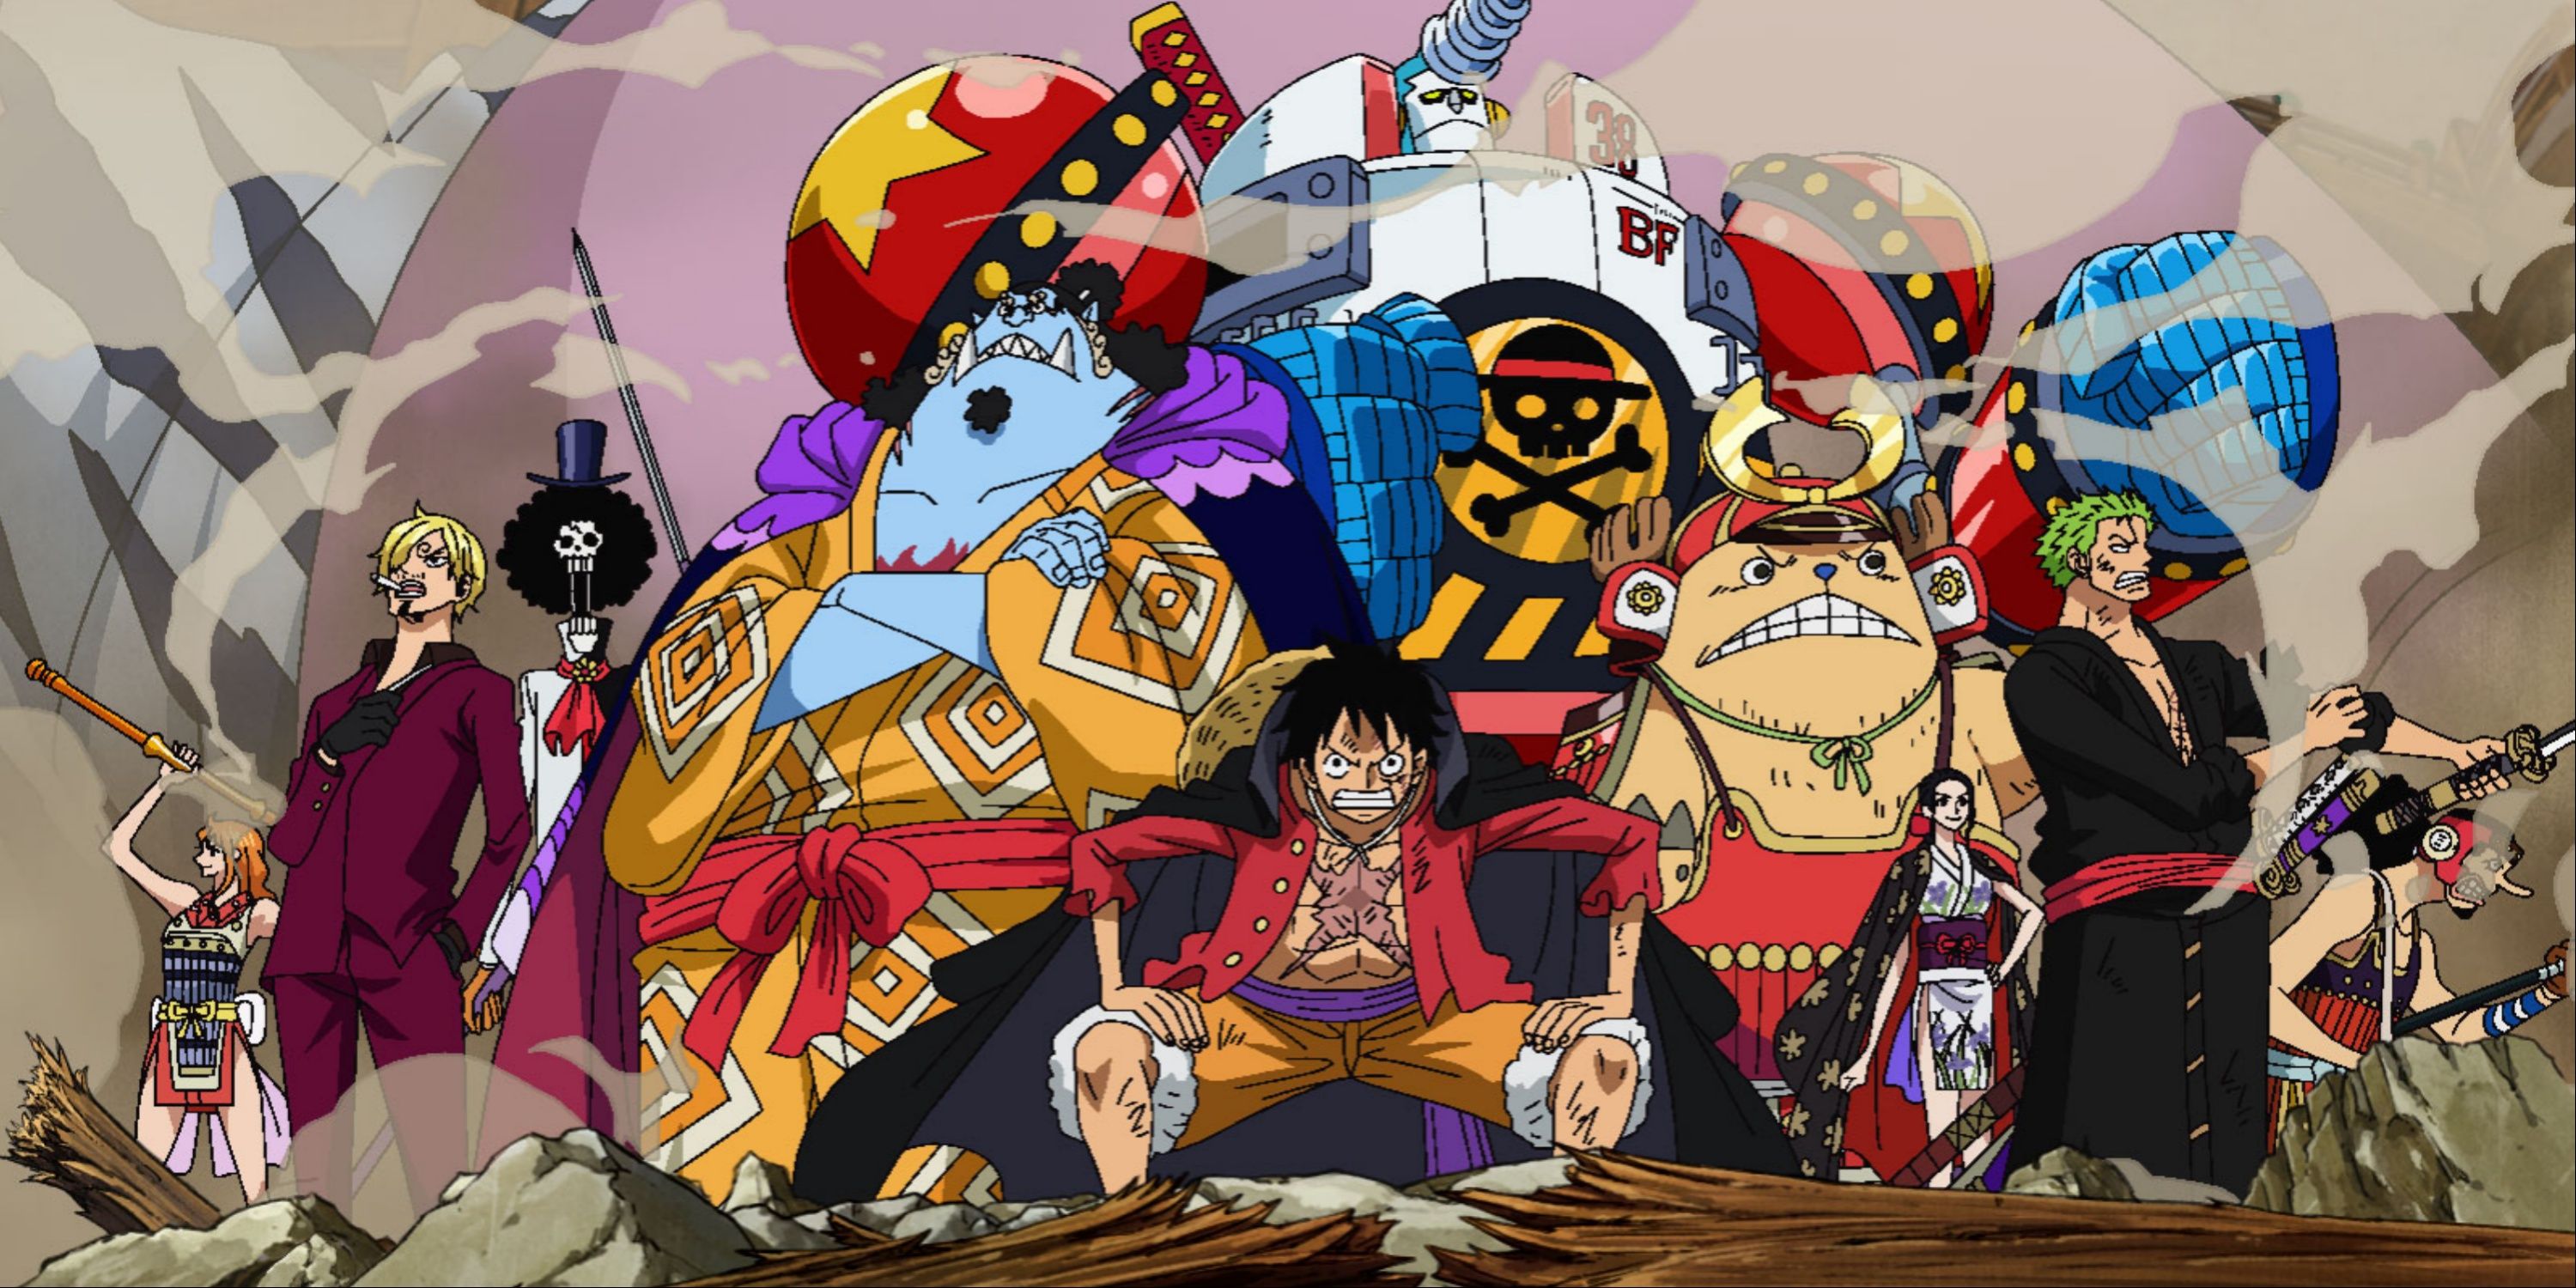 The Straw Hats together in Episode 1000 of the One Piece anime in fighting poses